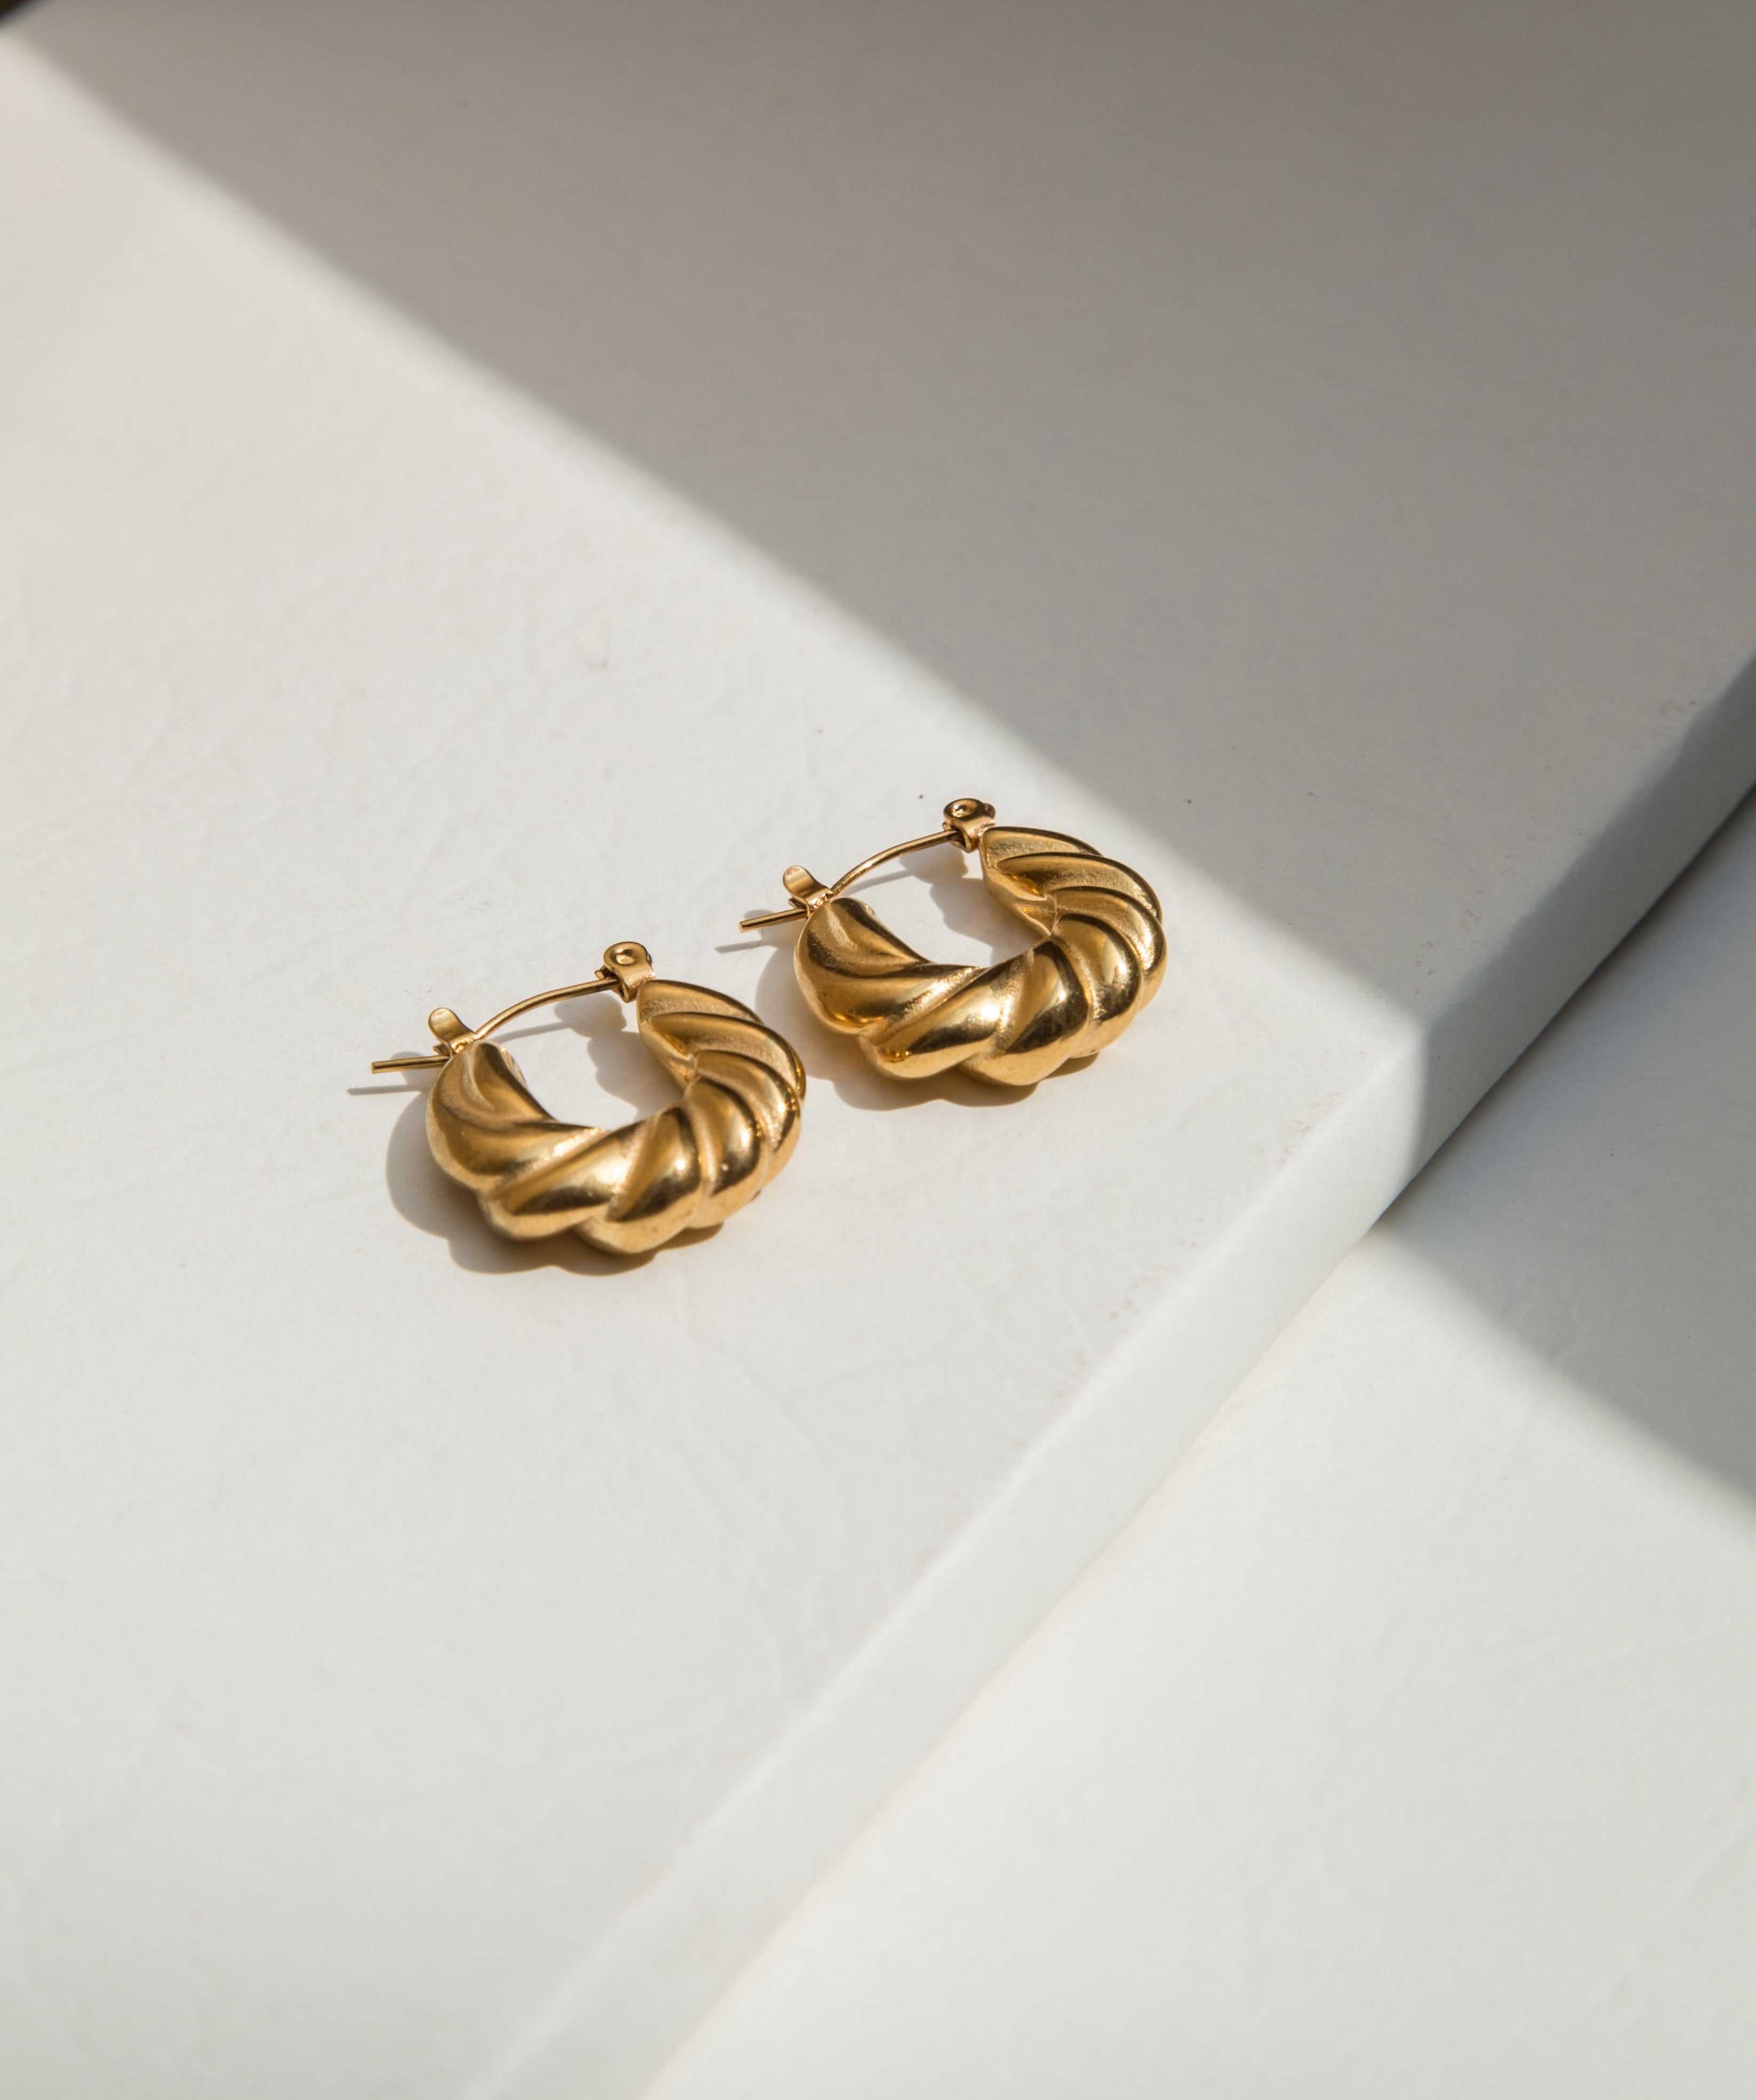 Material : Stainless Steel  - 18k Gold Plated   - Hypoallergenic   - Tarnish & Water Resistant   Dimension : Length 19mm, Width 22mm  Weight : About 13g    Stylish croissant-shaped design that adds a touch of whimsy to your look. Crafted with attention to detail, these hoops are the perfect blend of elegance and playfulness. These earrings are the perfect accessory to make a statement and add a touch of flair to any outfit.